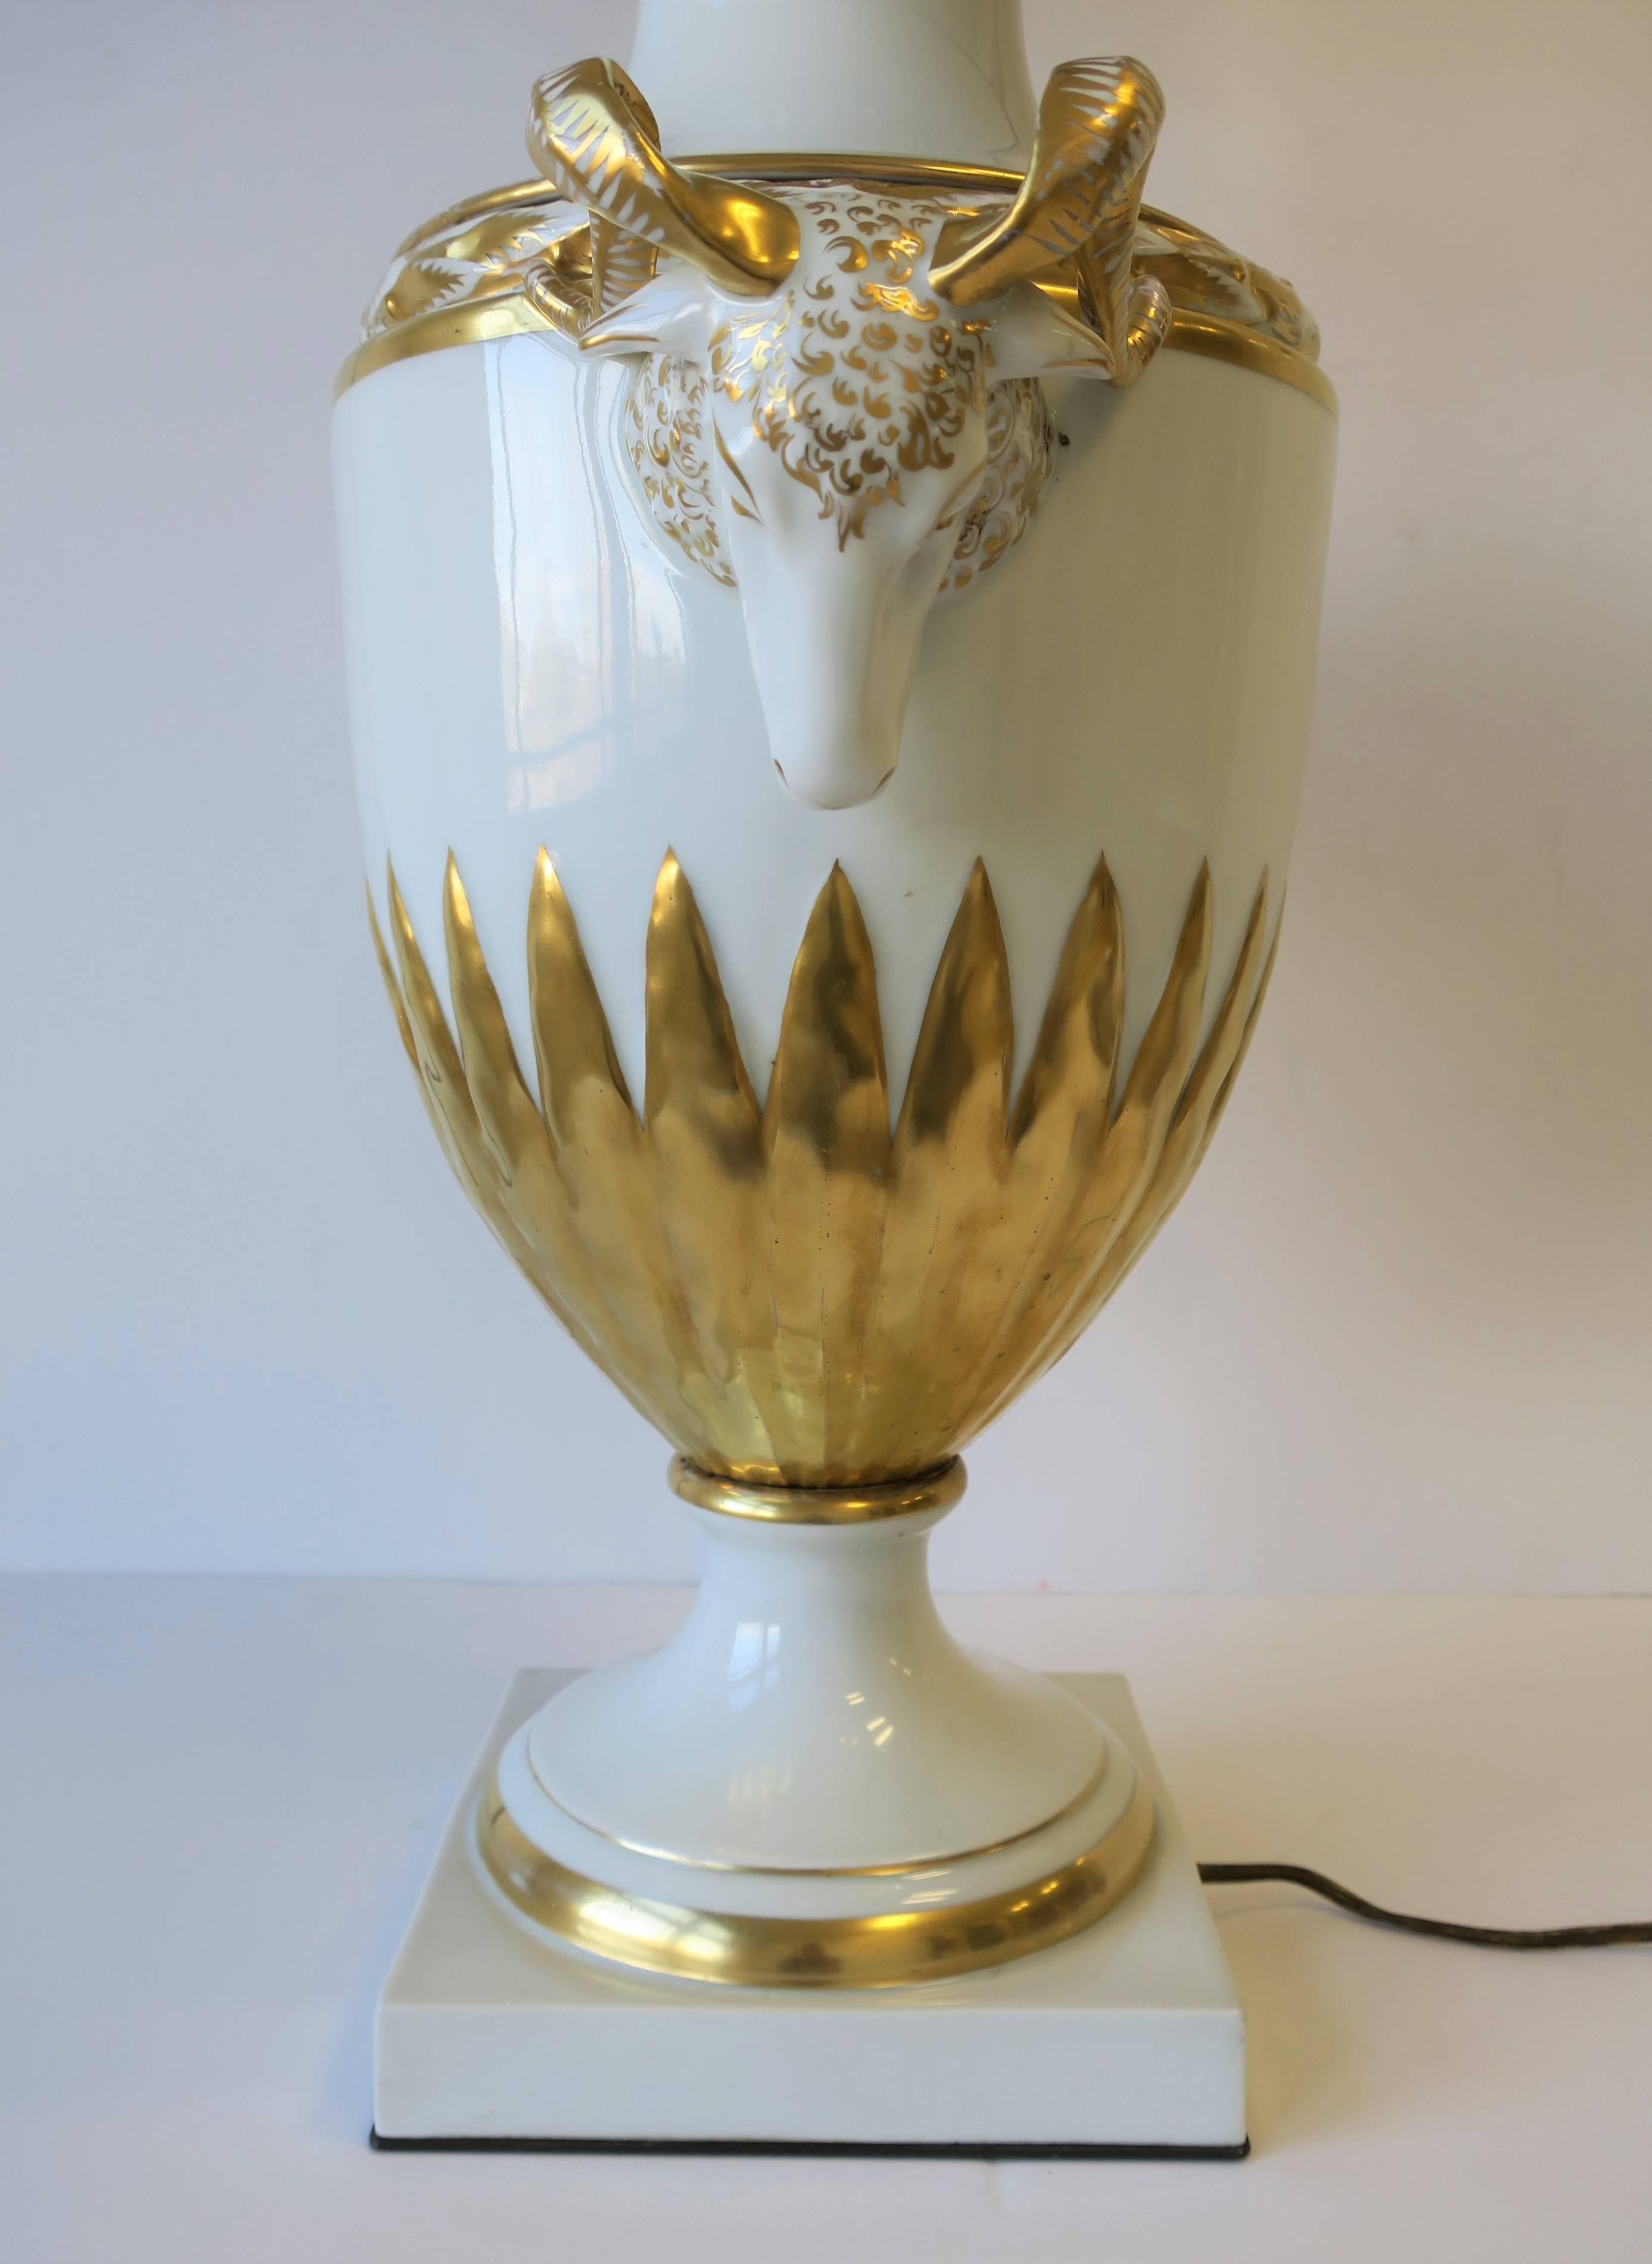 Urn and Rams Head White & Gold Porcelain Table Lamp Empire Style, German, Large For Sale 2